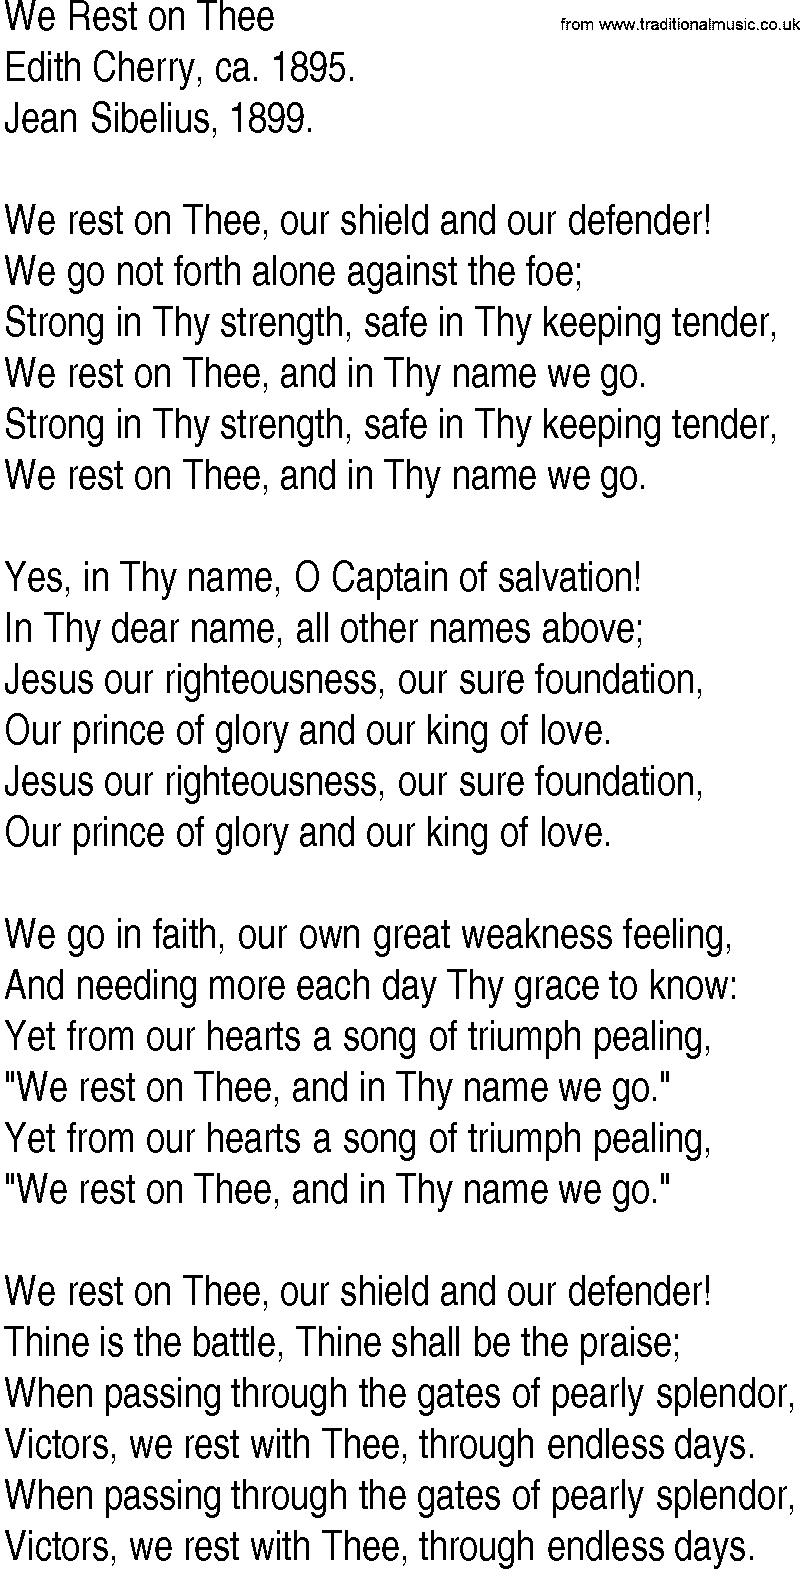 Hymn and Gospel Song: We Rest on Thee by Edith Cherry ca lyrics